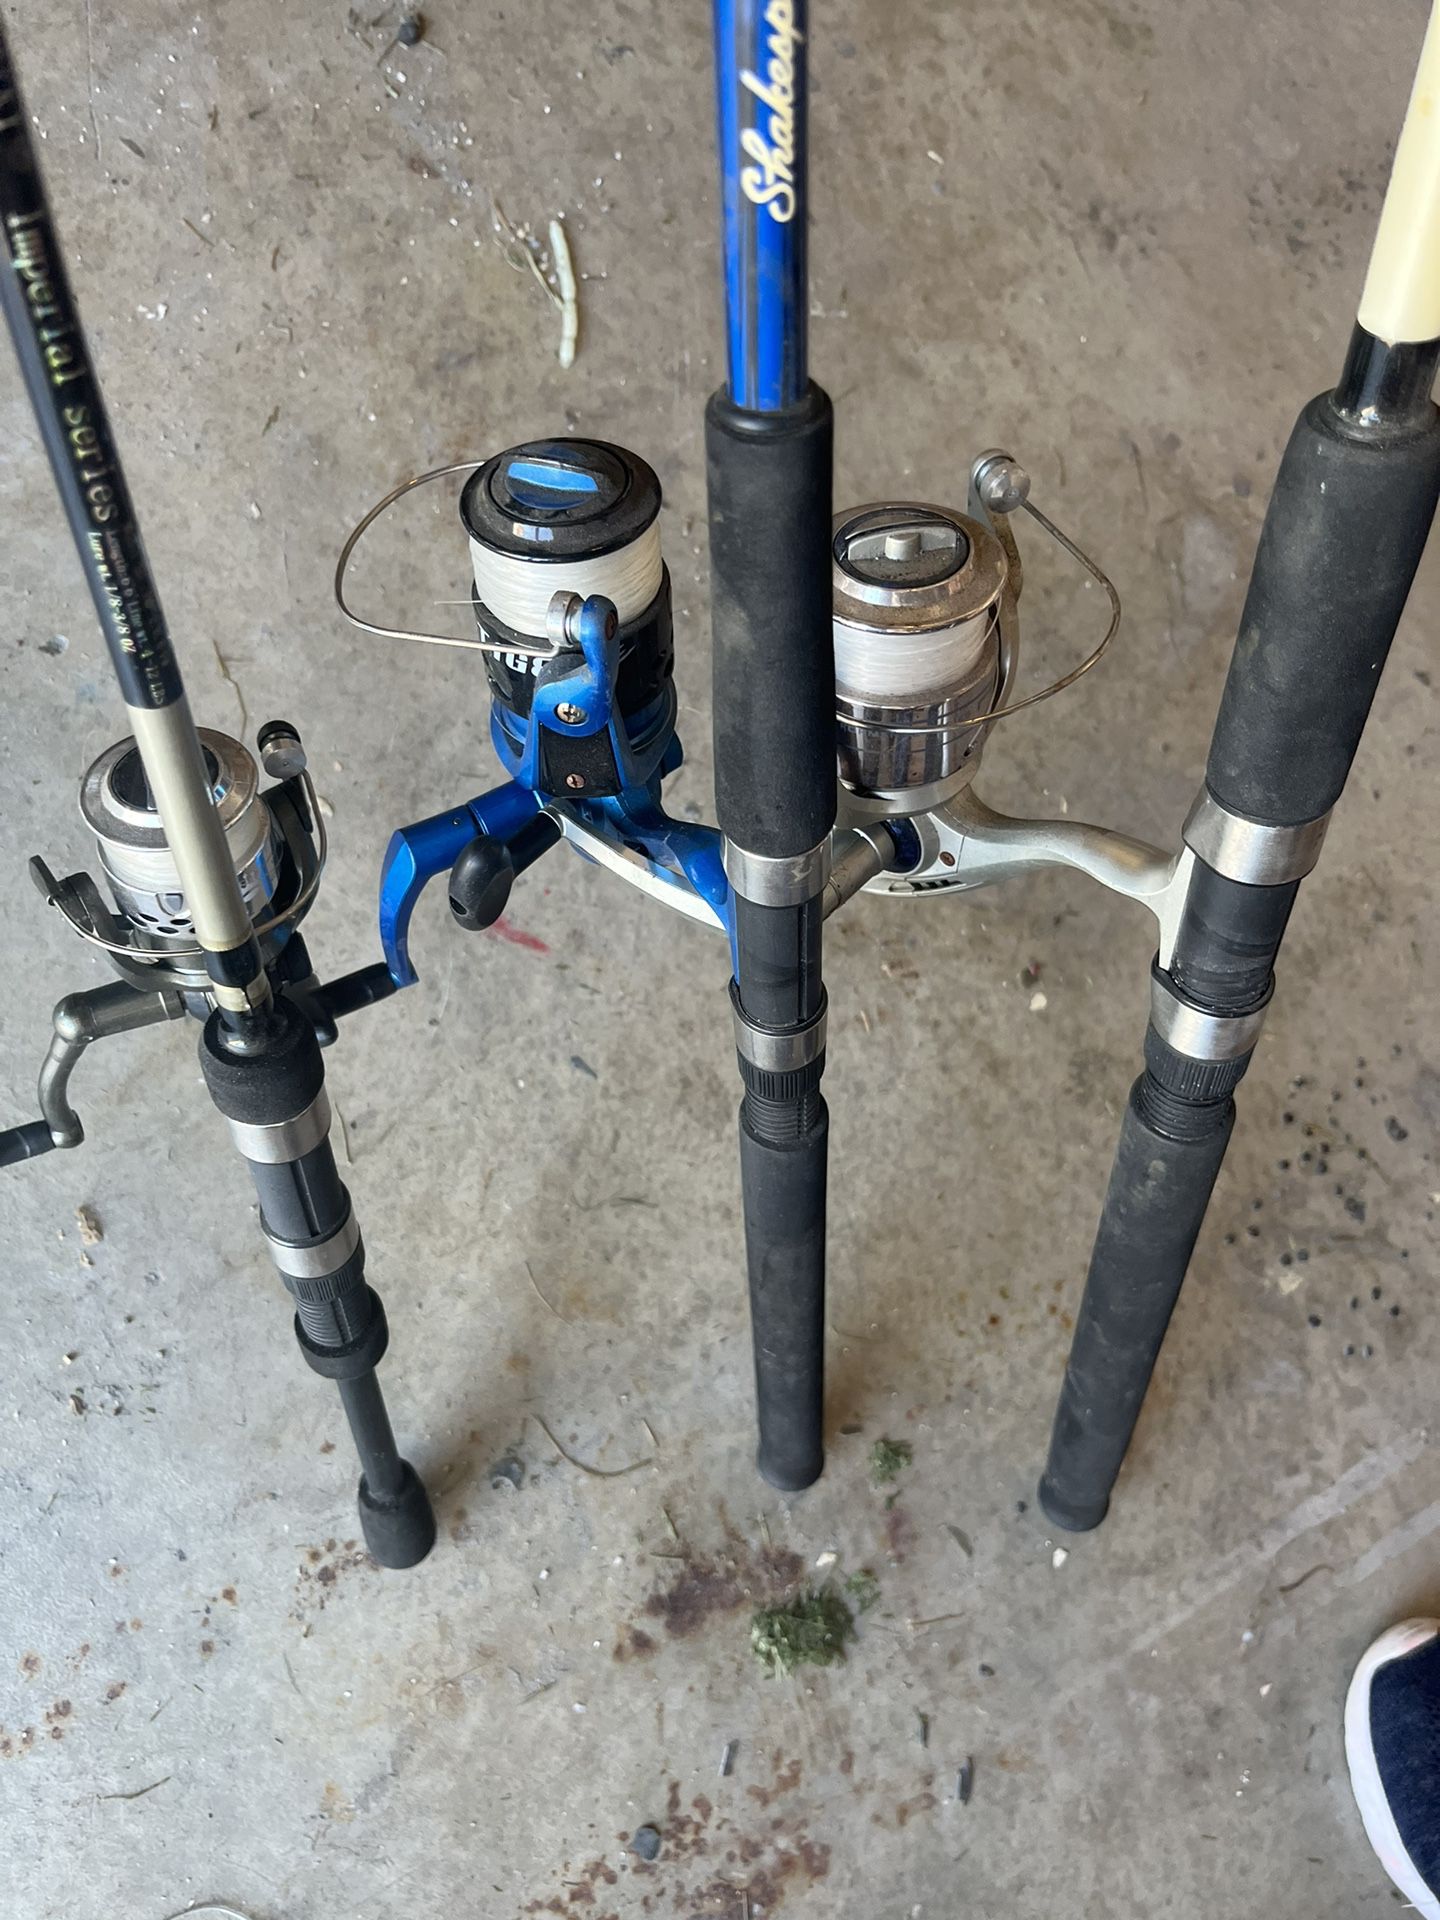 3 Fishing Rods & Reels for Sale in Chula Vista, CA - OfferUp